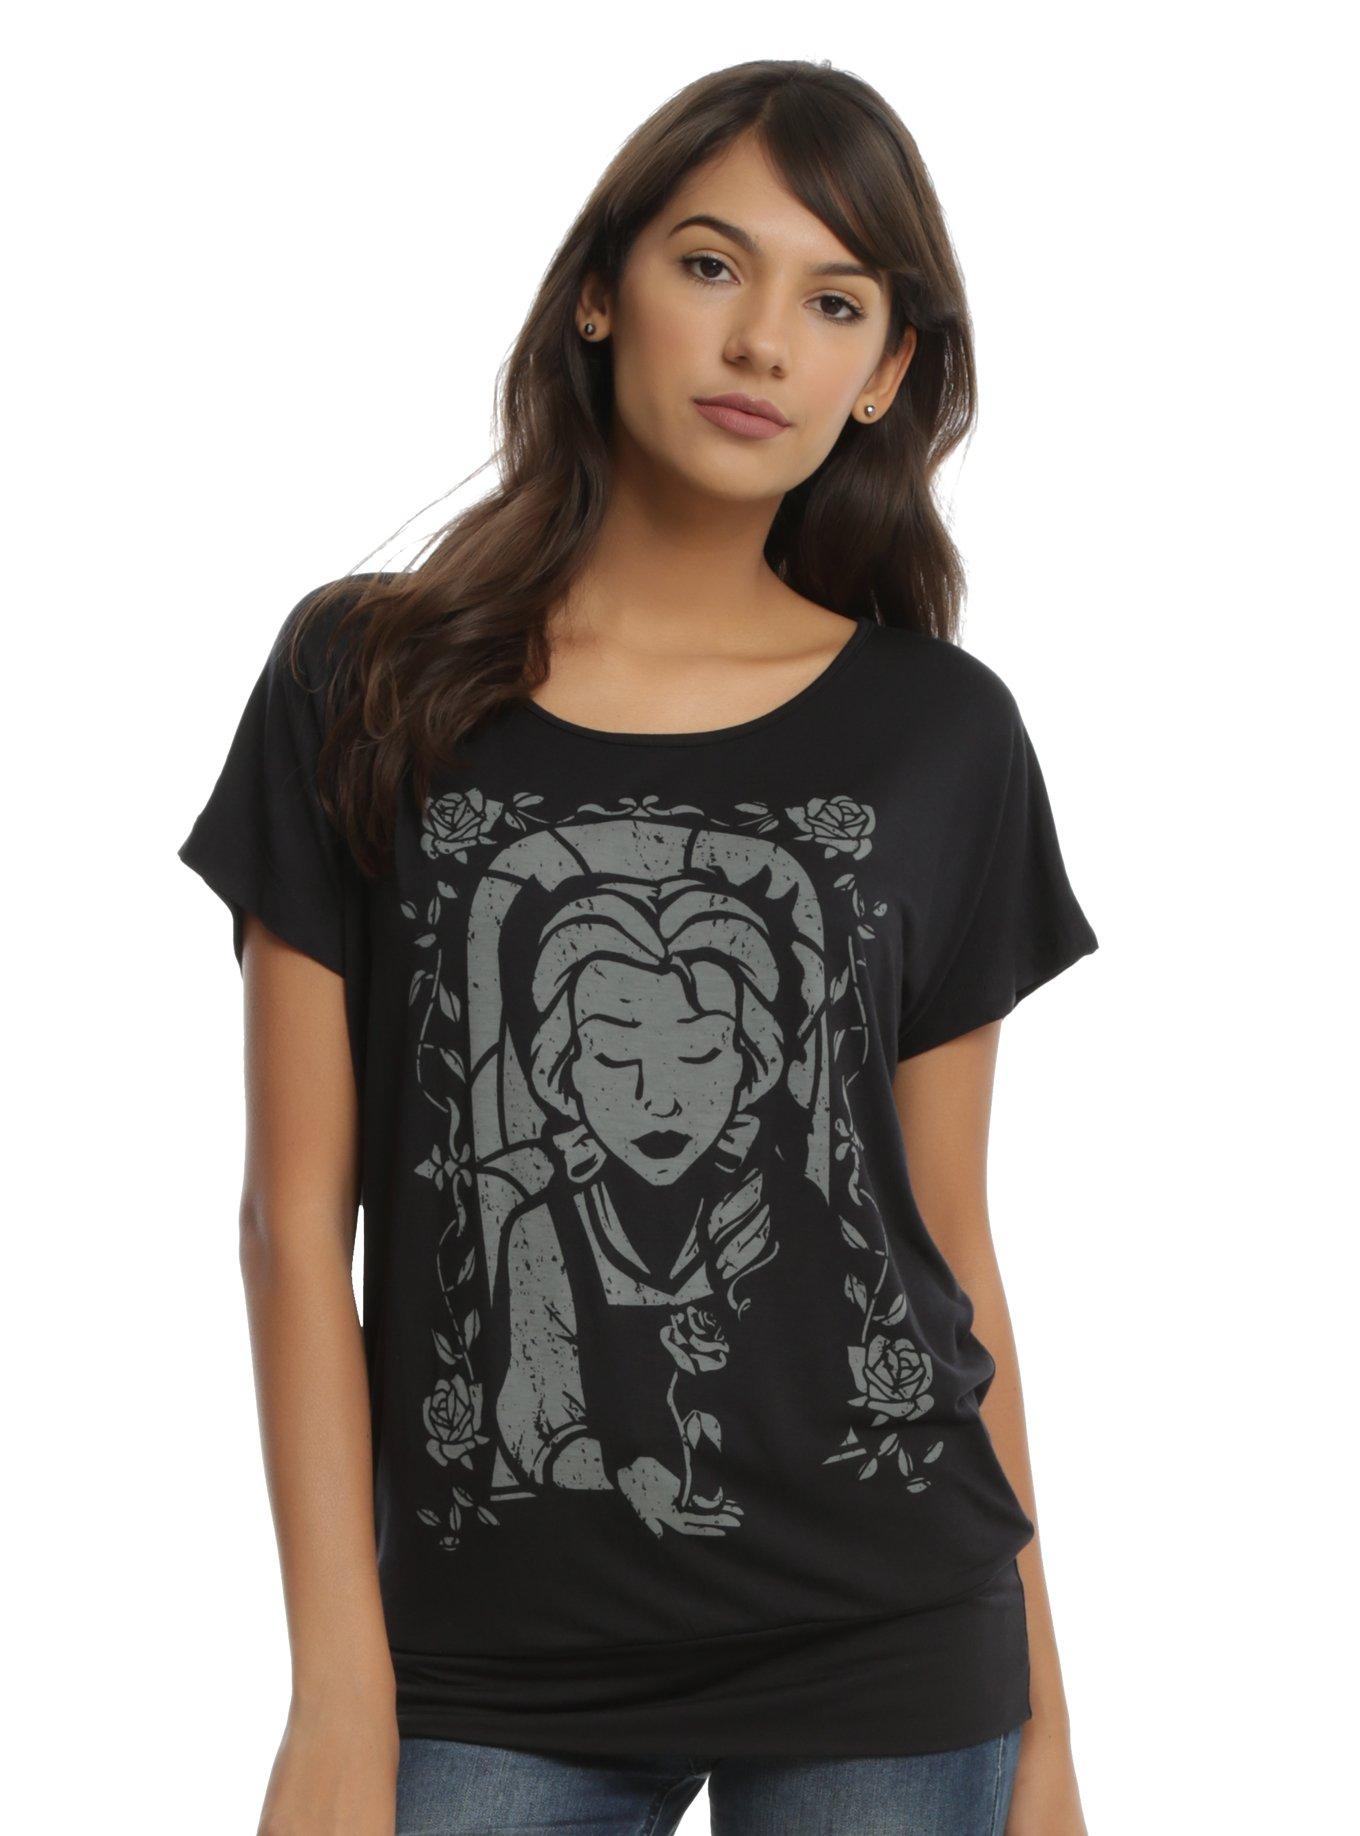 Disney Beauty And The Beast Stained Glass Girls Dolman Top, BLACK, hi-res